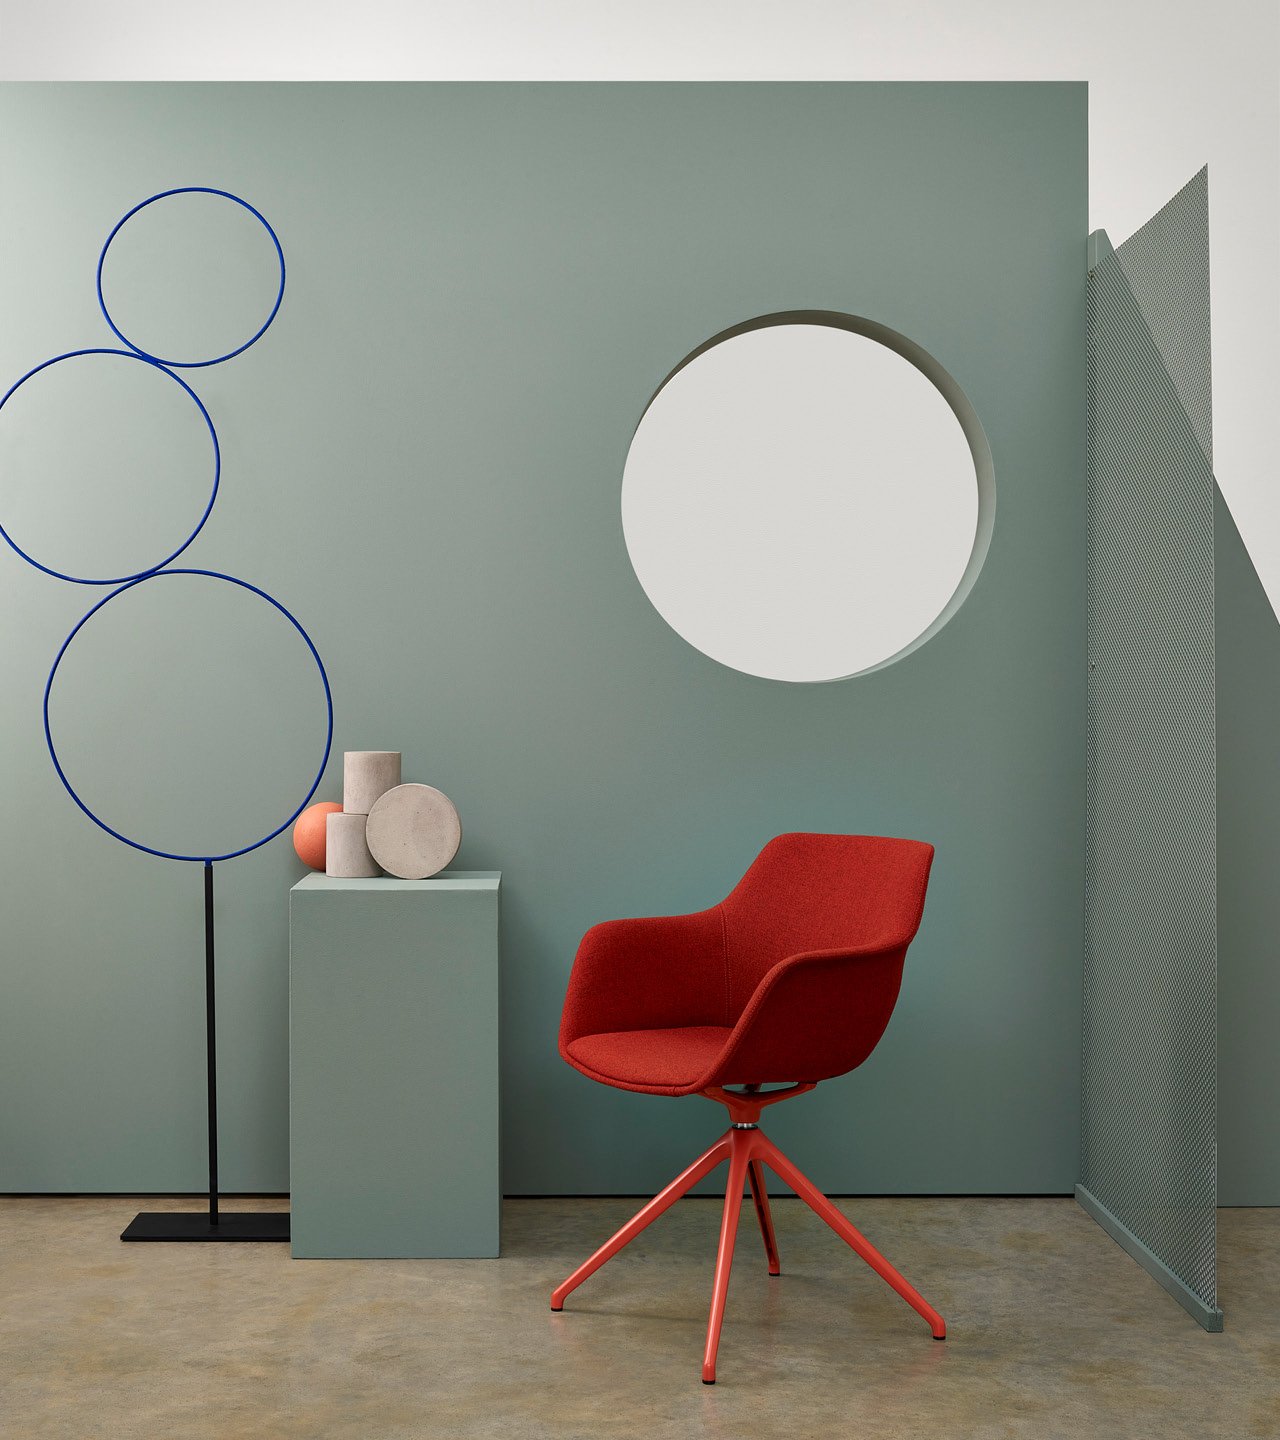 Introducing the Ola tub chair, created in collaboration with the leading German furniture designer Wolfgang CR Mezger. 